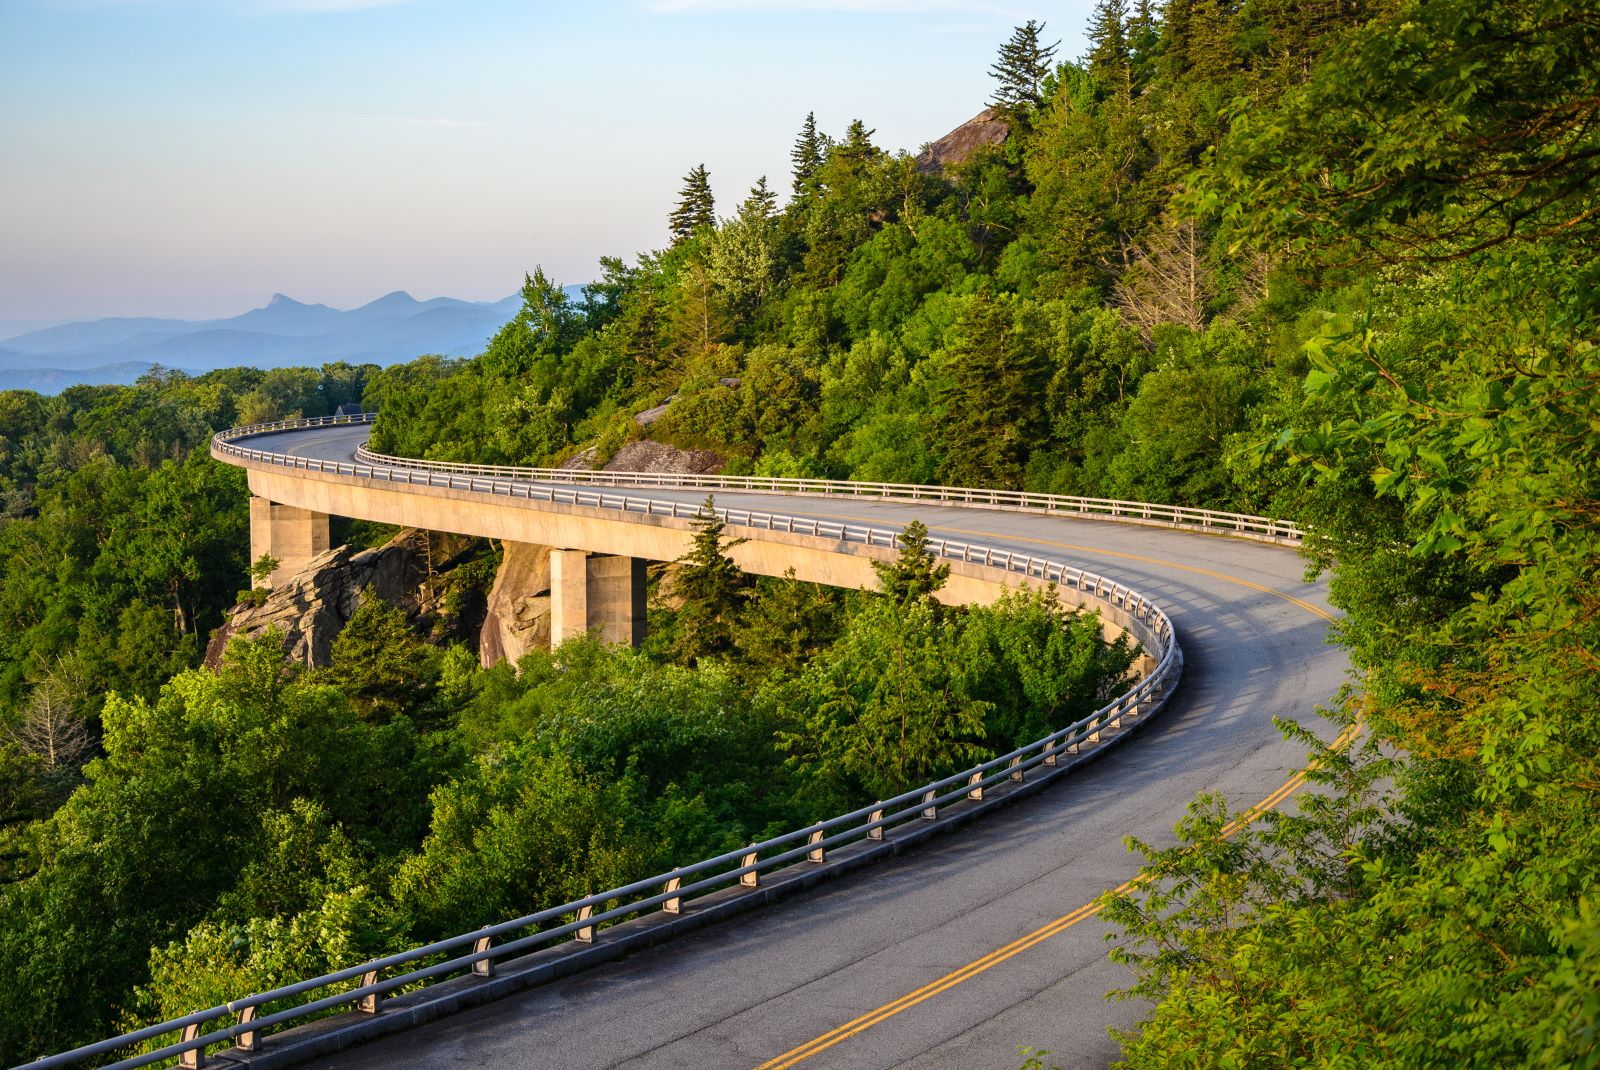 Image credit: Shutterstock / Zack Frank <p>Asheville’s vibrant arts scene and the scenic parkway are perfect for families looking for culture and nature. Tip: Many of Asheville’s galleries offer free entry.</p>